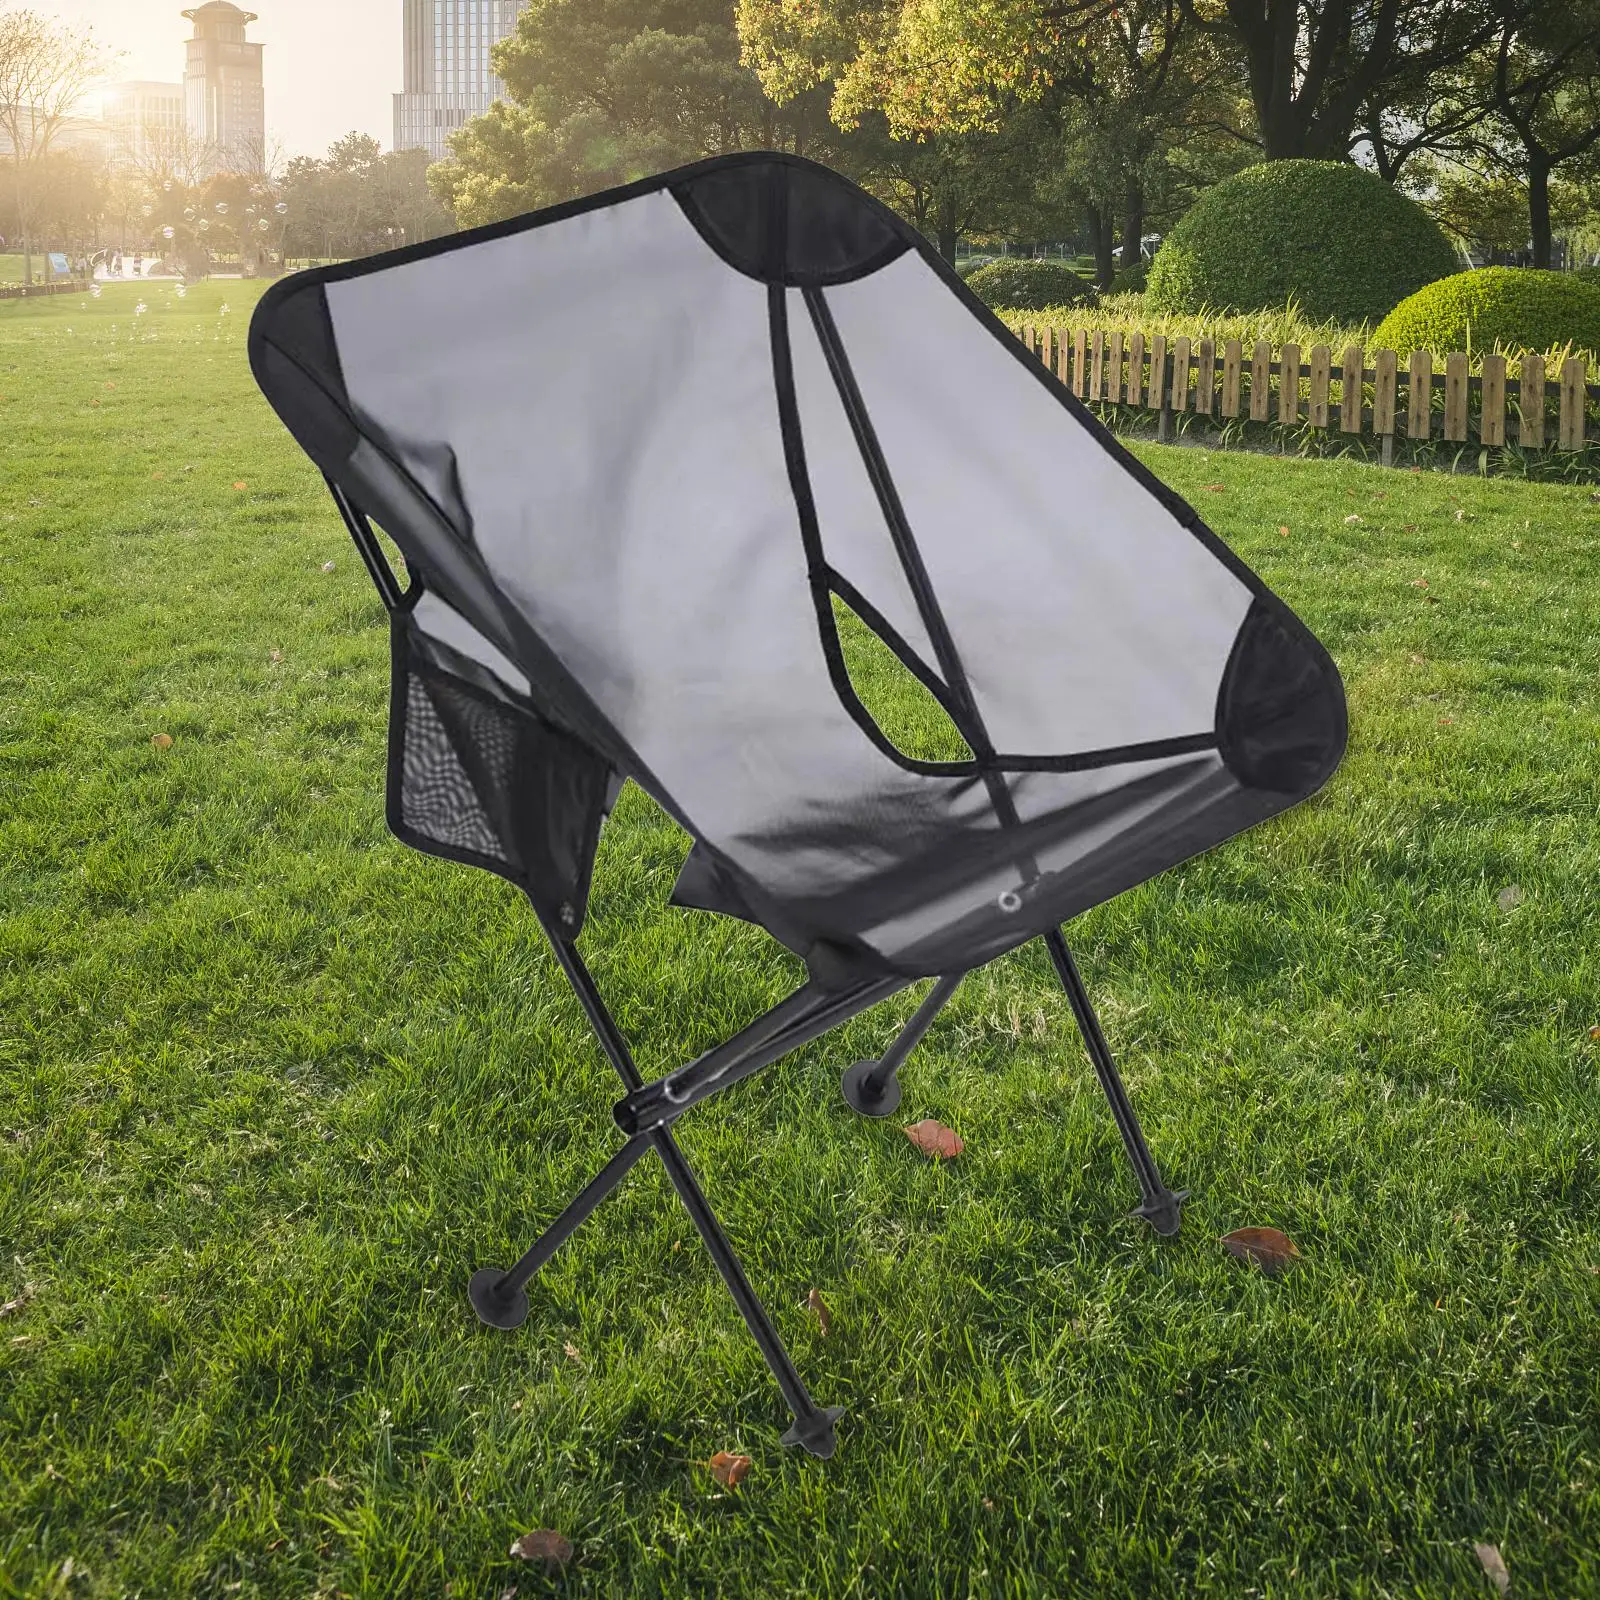 Folding Camping Chair Portable Folding Chair for Outdoor Backpacking Garden